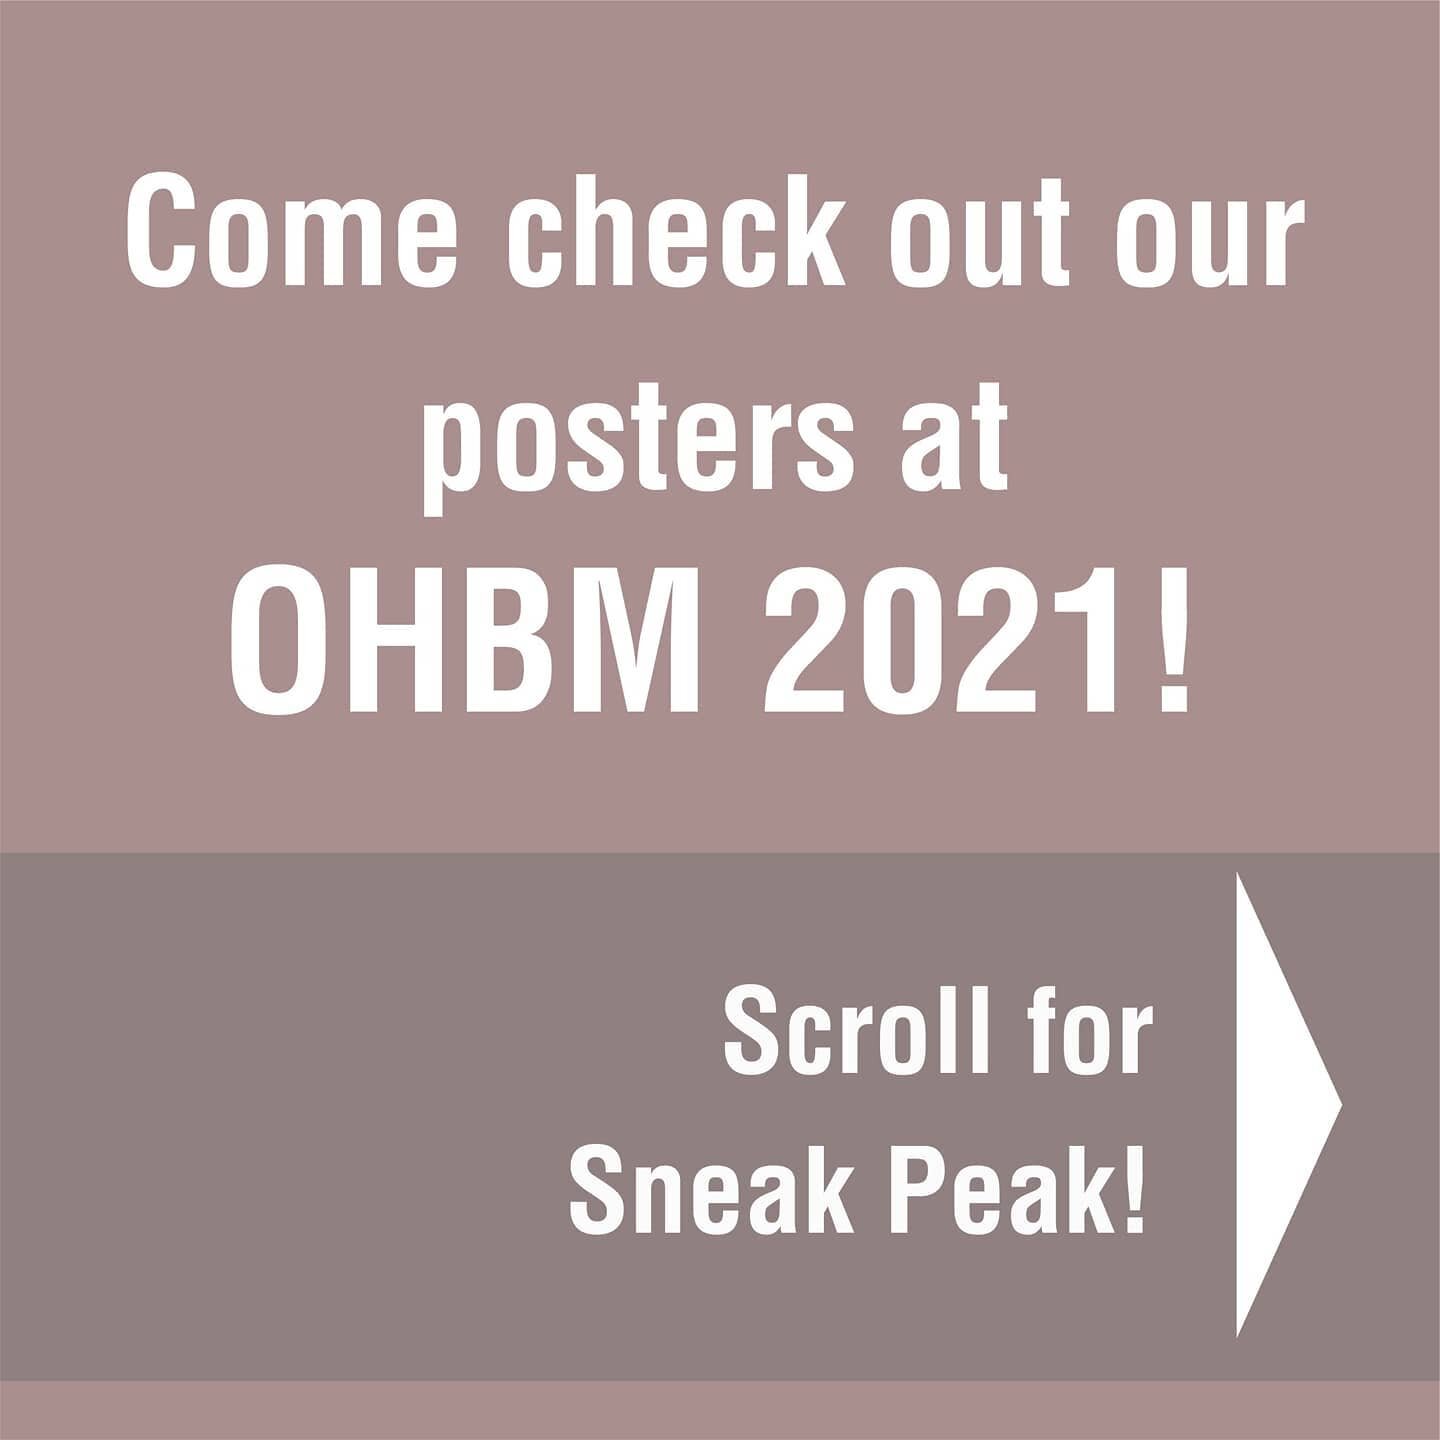 Join us at the OHBM 2021 annual meeting&nbsp;today, June 20th, where Bray lab Masters candidate Shefali Rai (Poster# 1573), and PhD candidate Kirk Graff(Poster# 1371) will be presenting their research on human brain mapping using neuroimaging!

Shefa